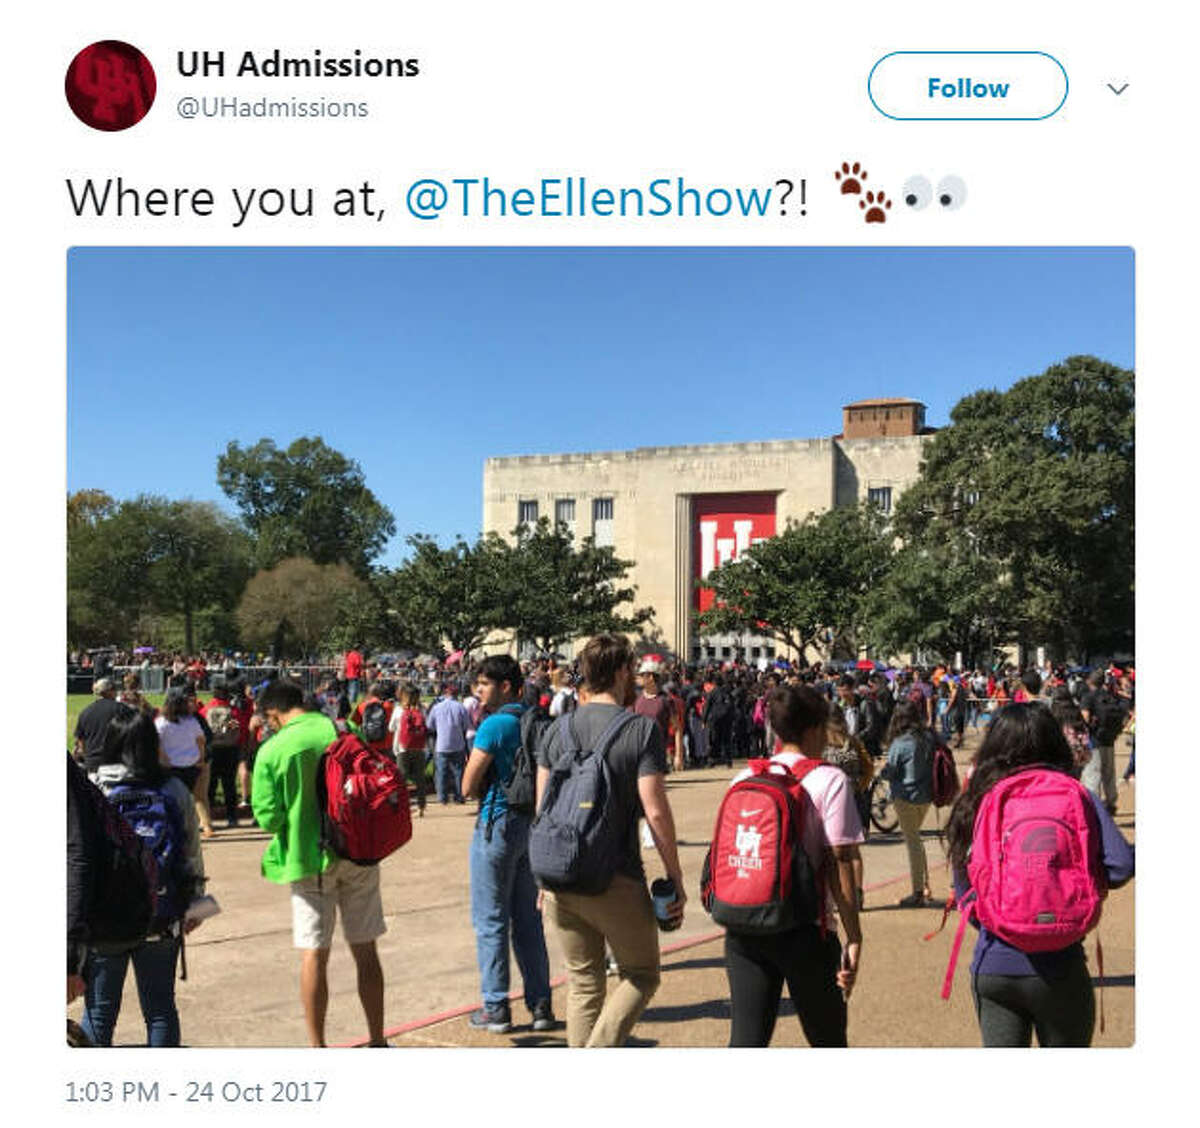 Students and fans have been gathering in front of the E. Cullen building at the University of Houston in anticipation after Ellen DeGeneres tweeted she'd be giving away World Series tickets at the campus. Photo: Twitter